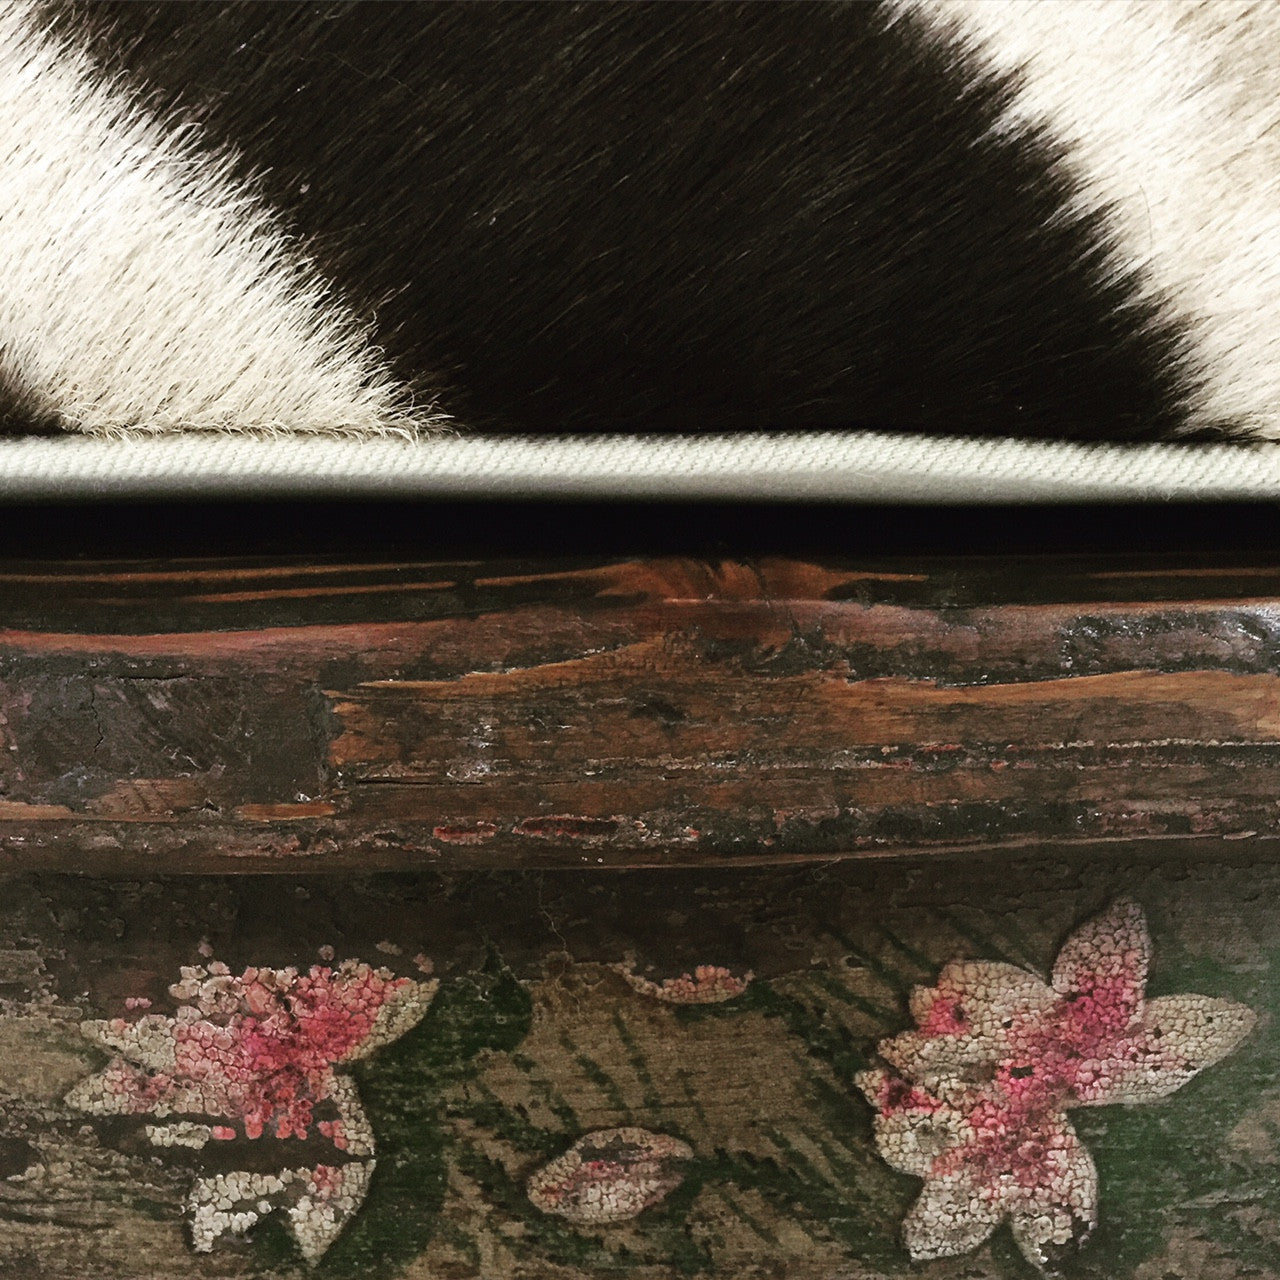 Painted Chinese Bench with Zebra Cushion - FORSYTH